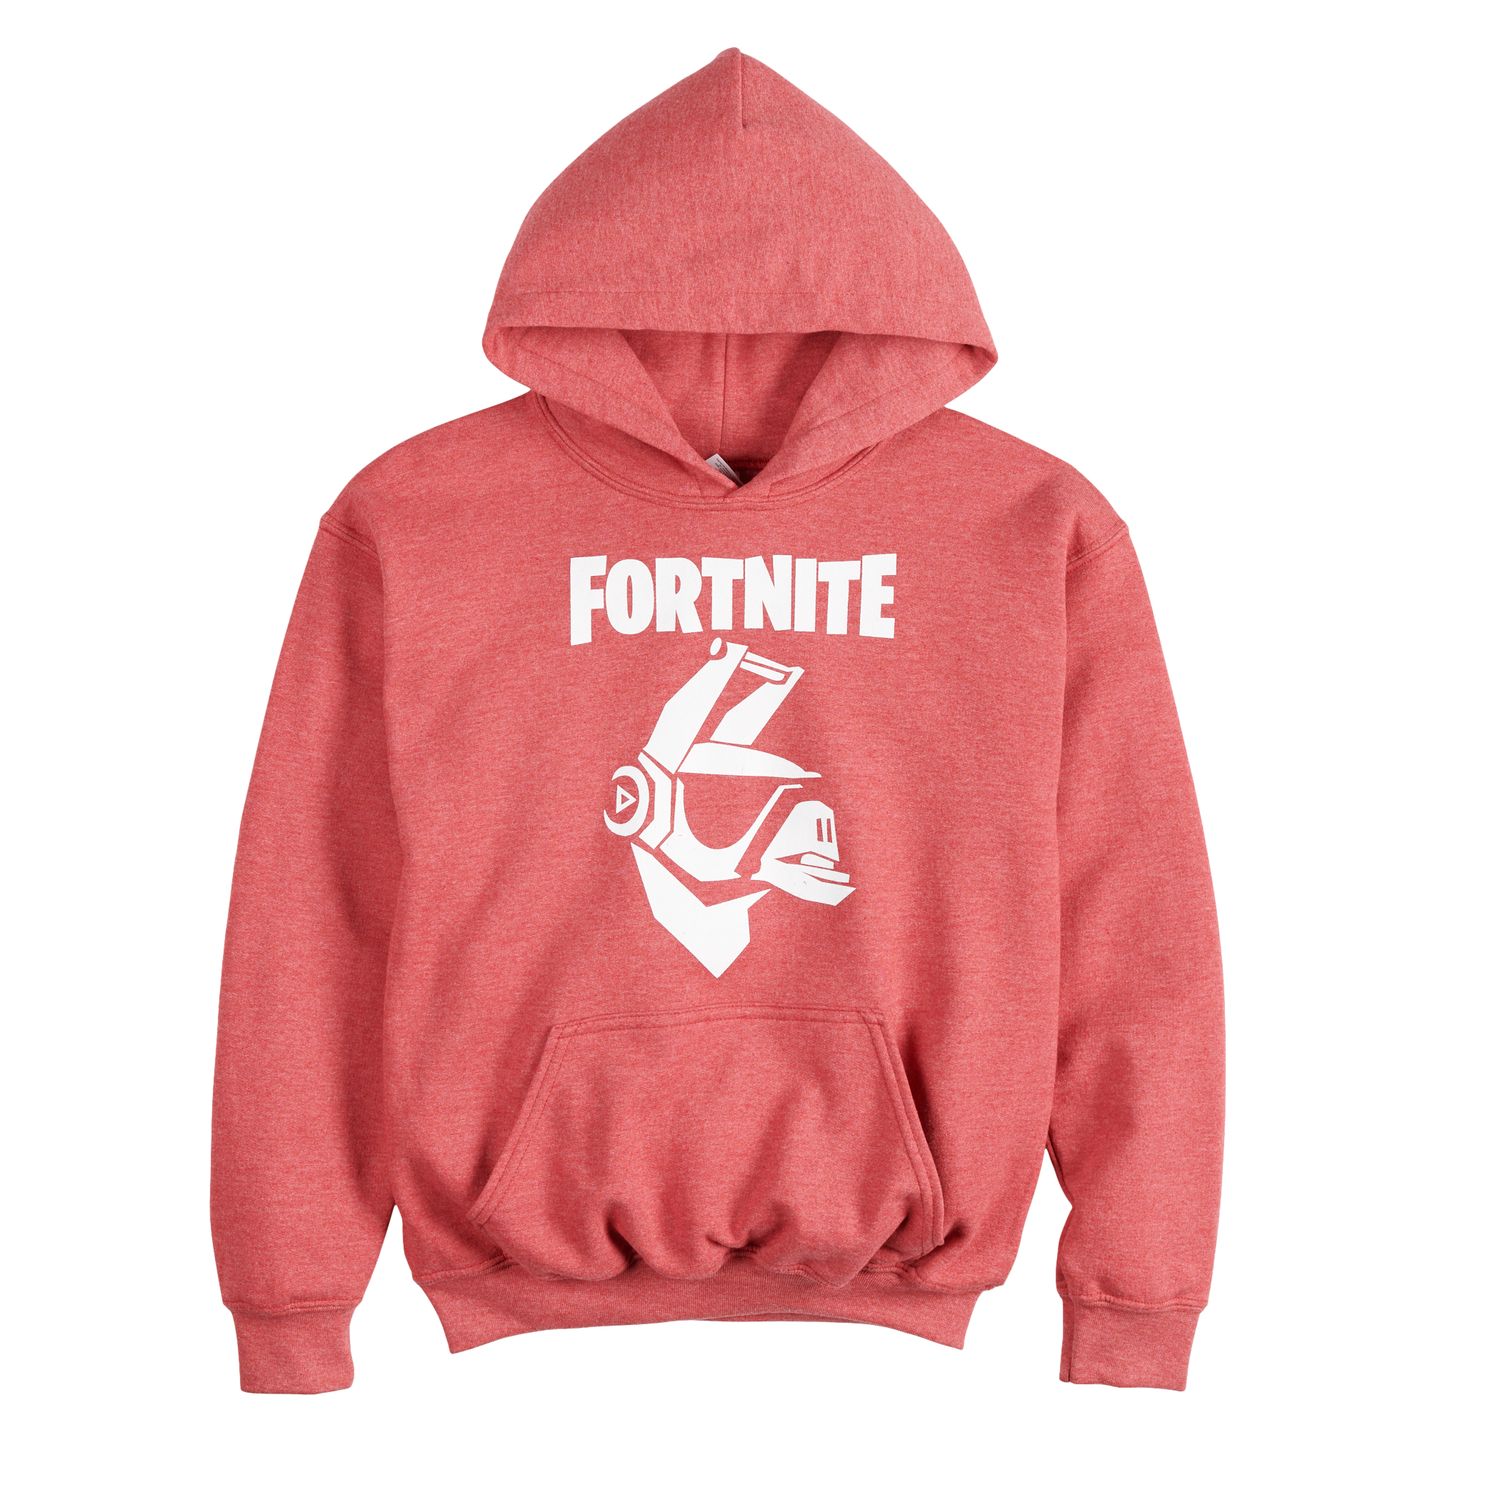 Fortnite Gear Toys Shirts Hoodies And Gaming Bundles Kohl S - site roblox.com catalog red hoodie